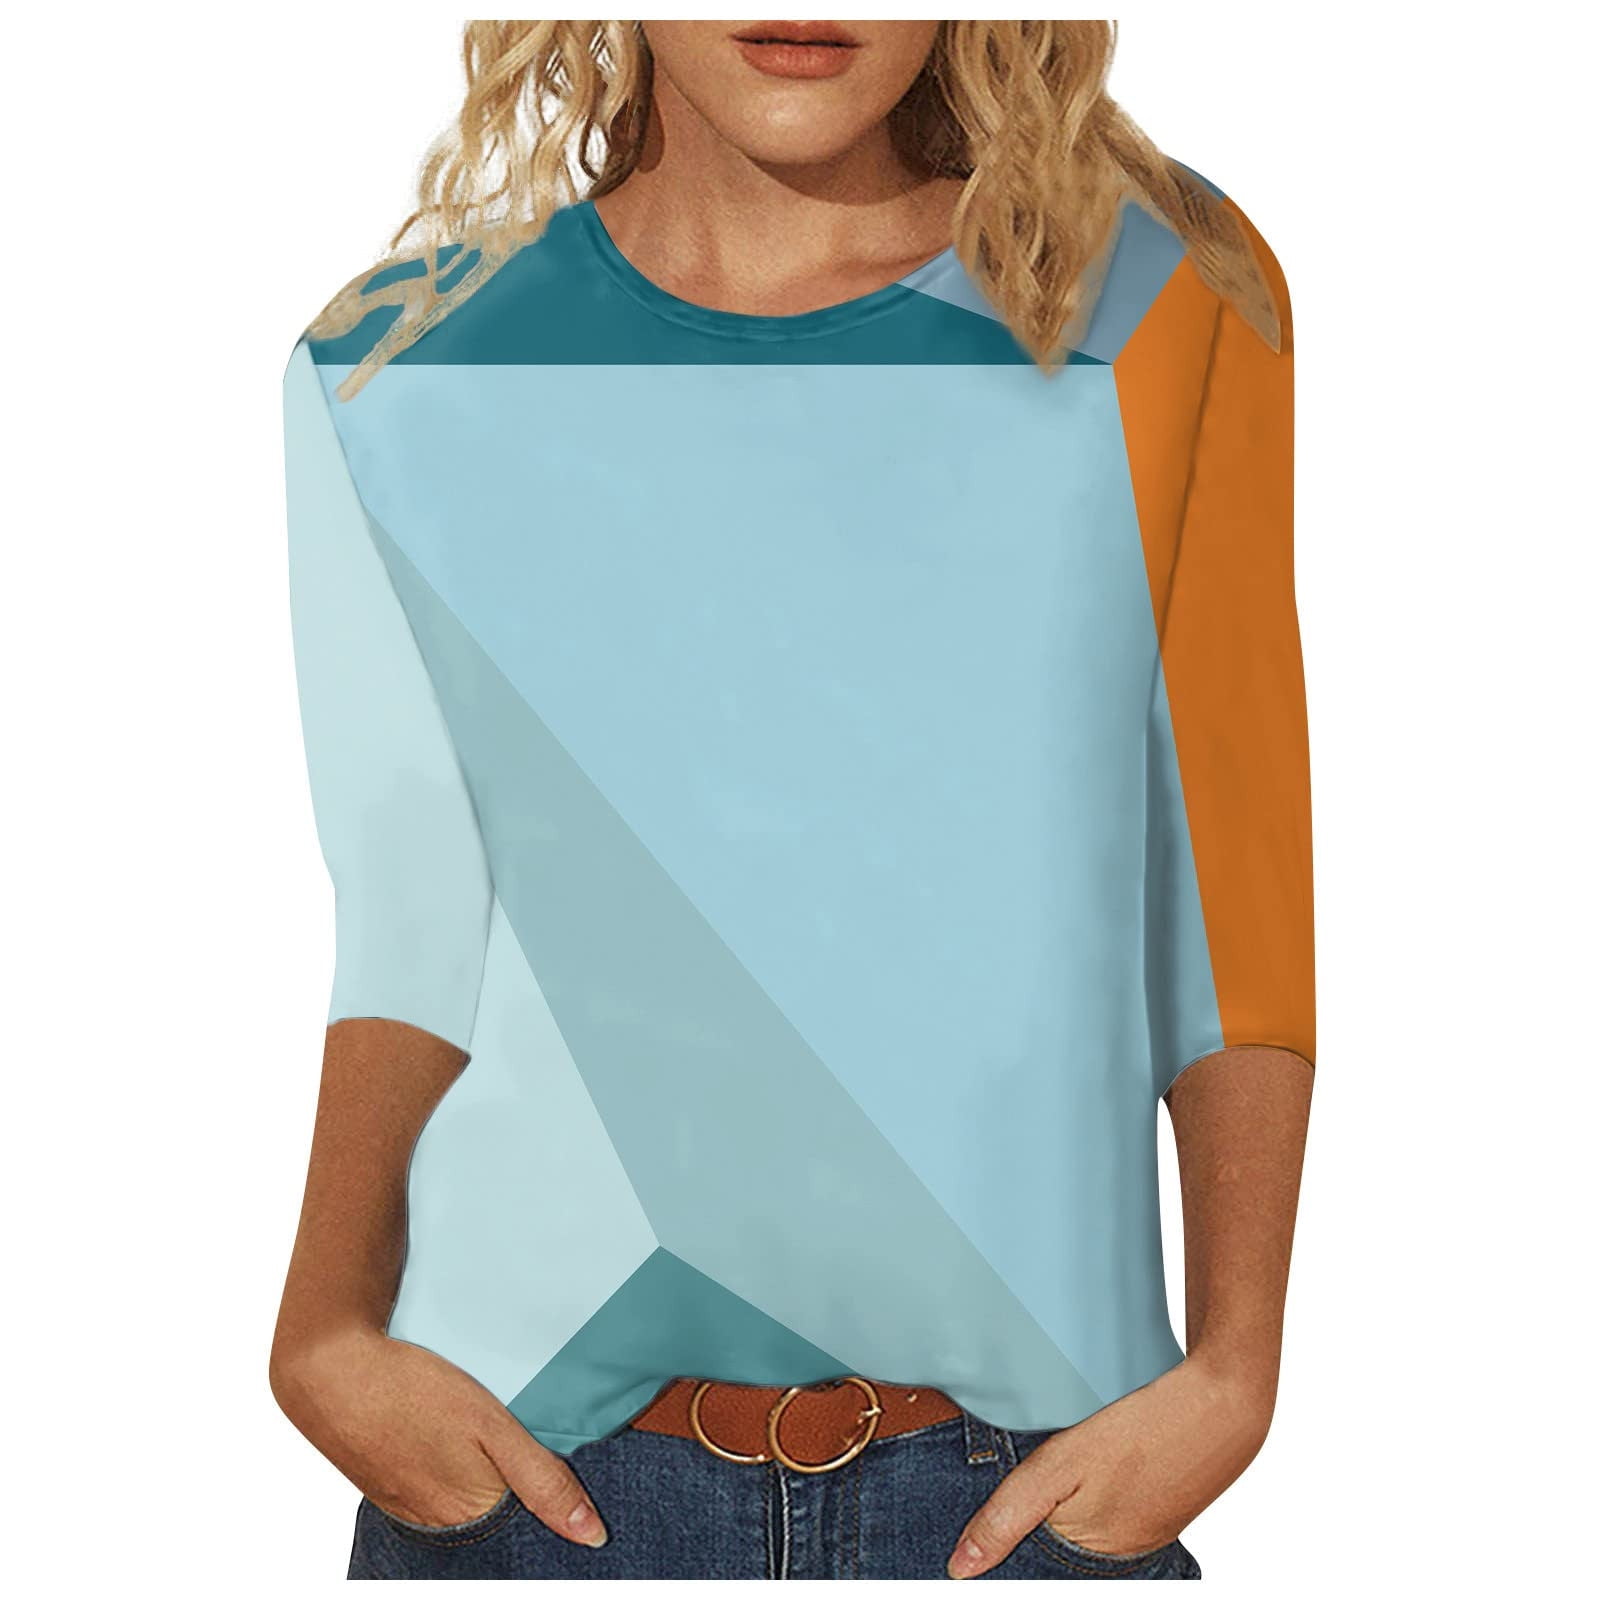 RQYYD Reduced Geometric Graphic Tops for Women 3/4 Sleeve Pullover